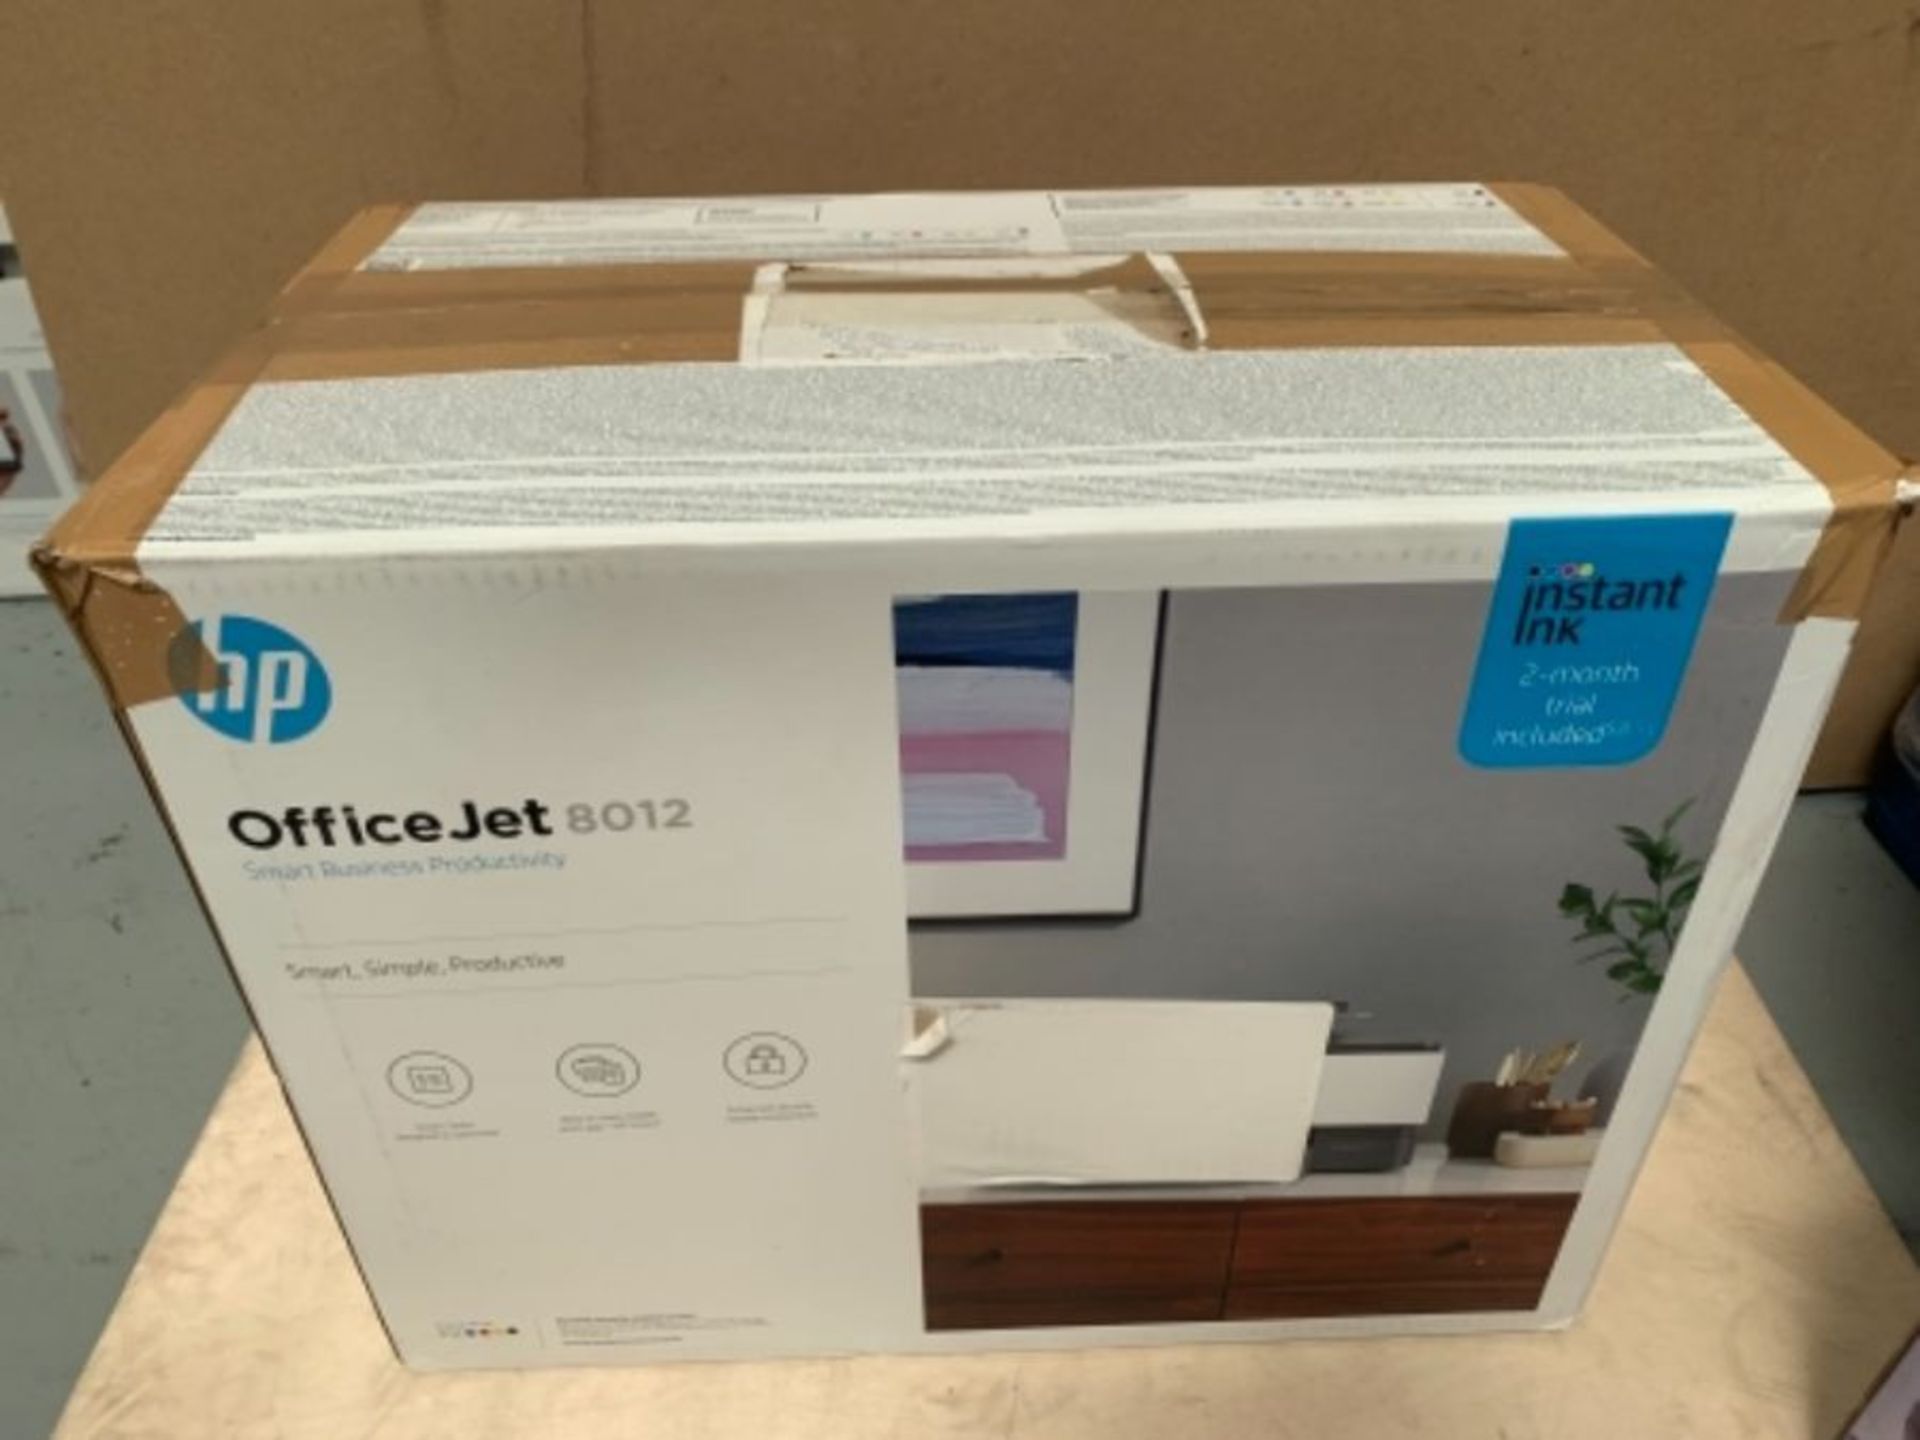 RRP £89.00 HP OfficeJet 8012 All-in-One Wireless Printer, Instant Ink Ready with 2 Months Trial I - Image 2 of 3